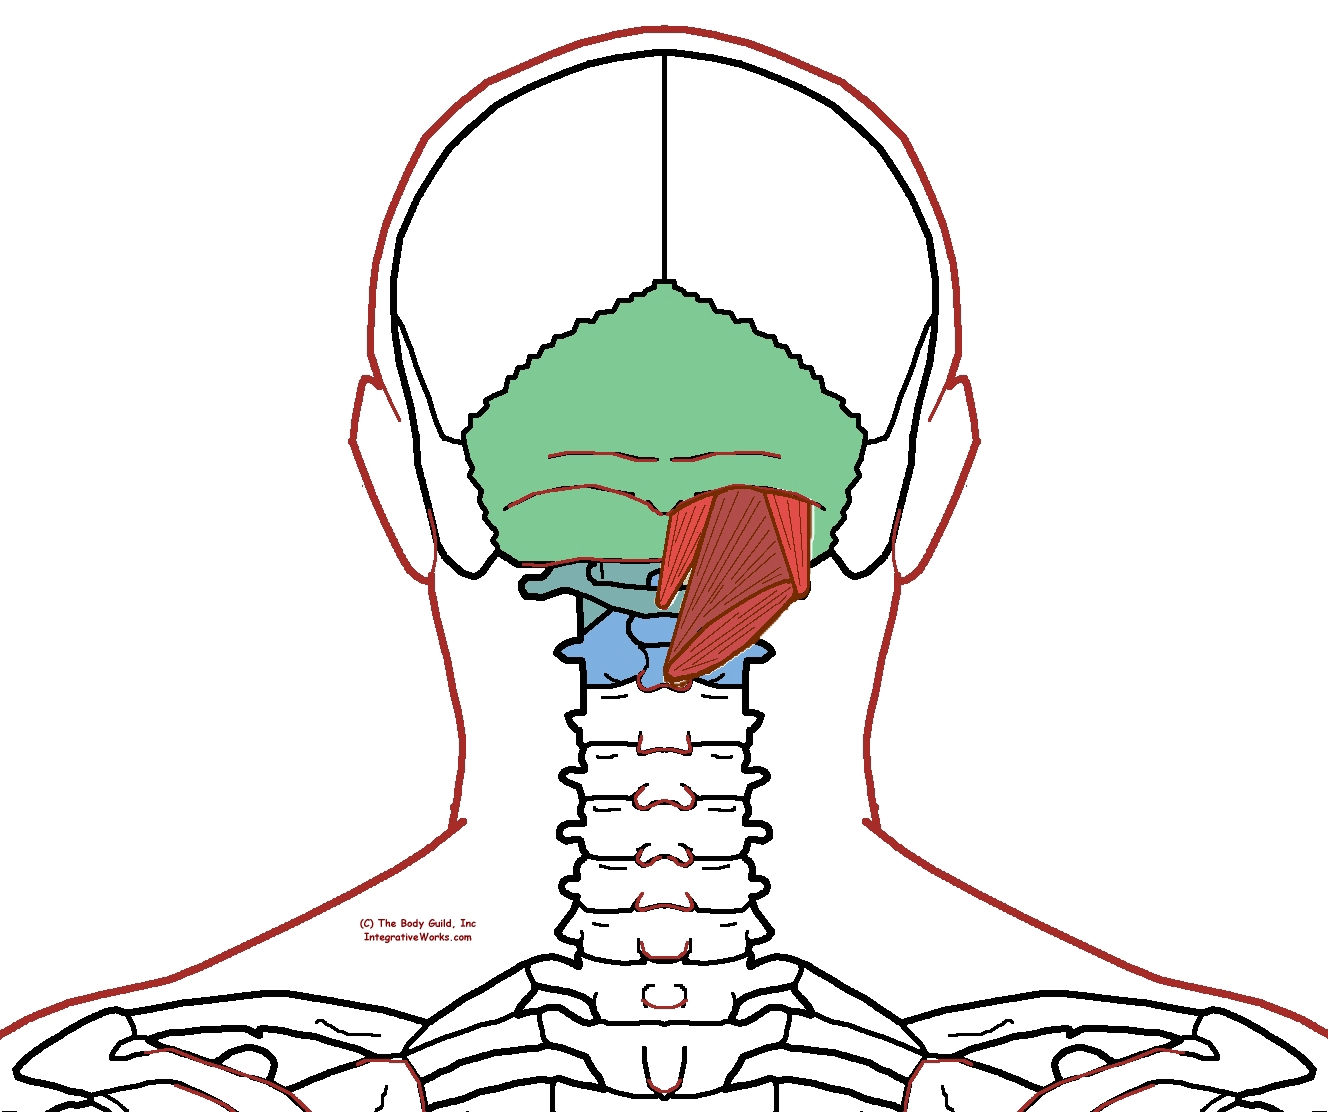 Suboccipital Muscles Functional Anatomy Integrative Works 9845